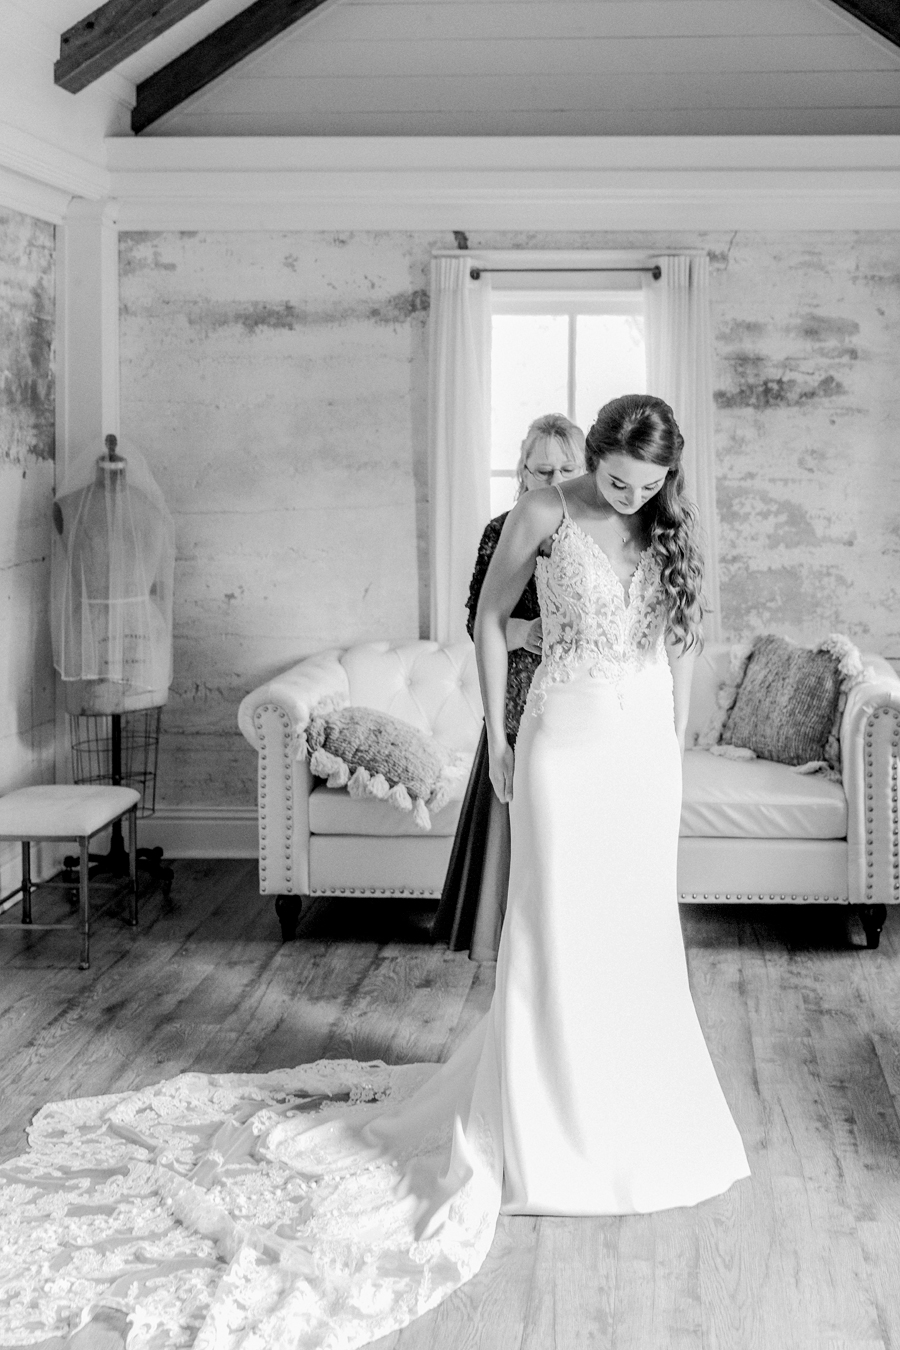 The bride puts her dress on in the bridal cottage at Wildcliff Weddings and Events.